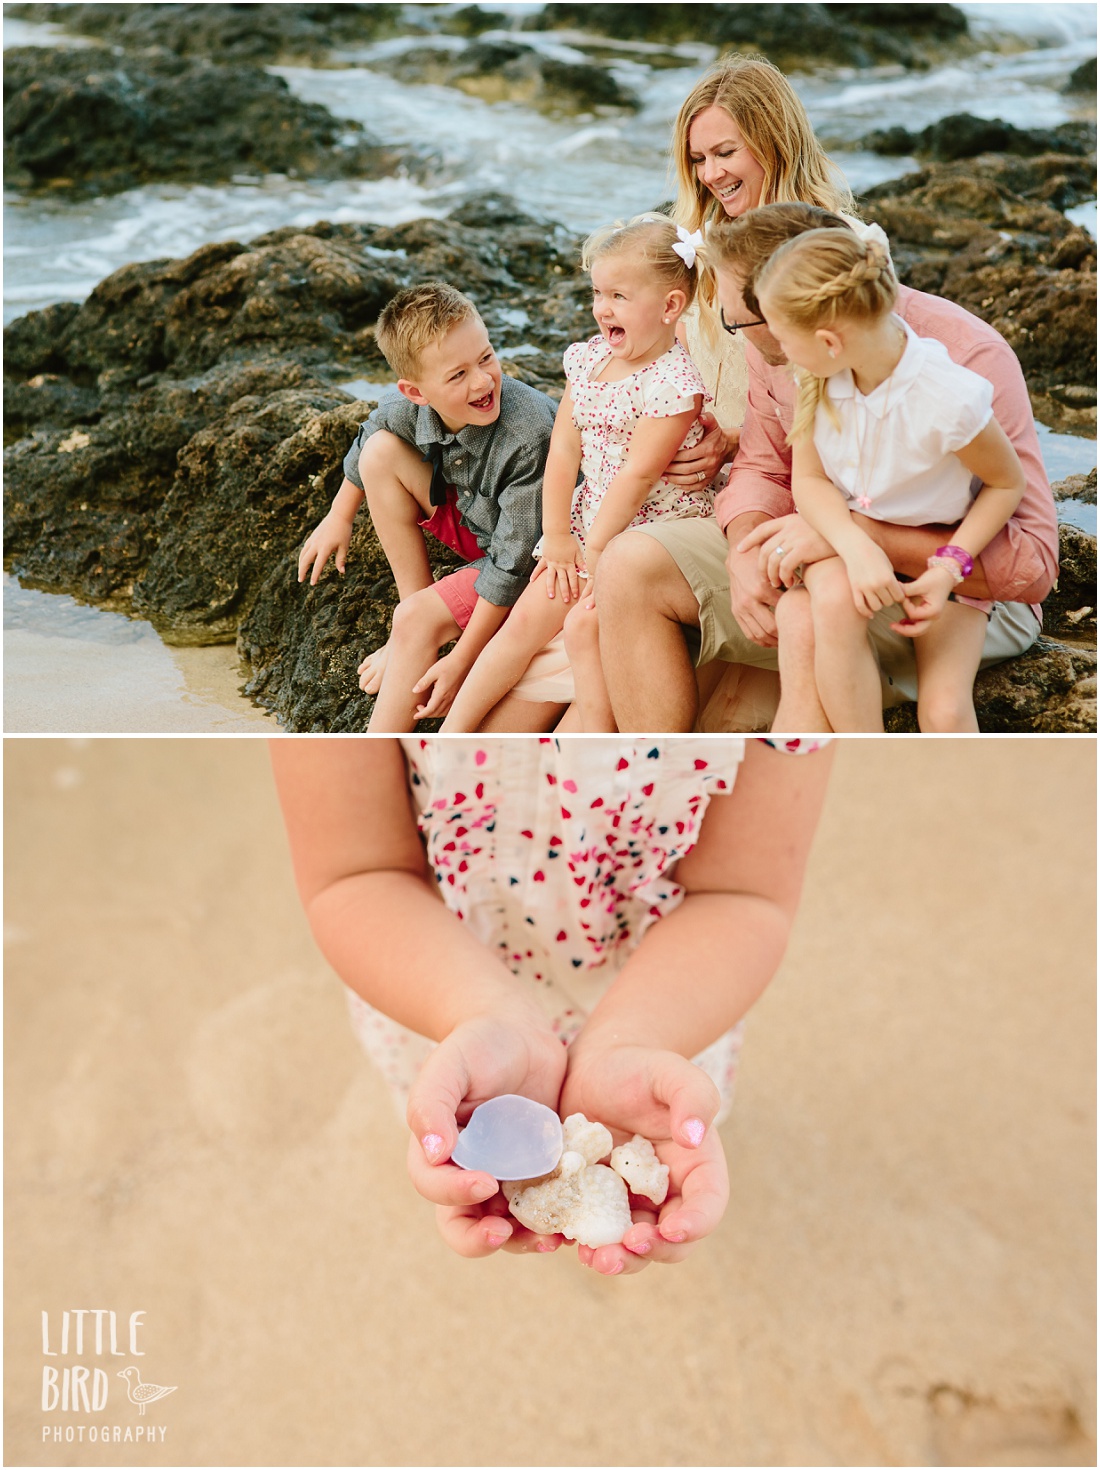 collecting-shells-at-the-beach-in-hawaii